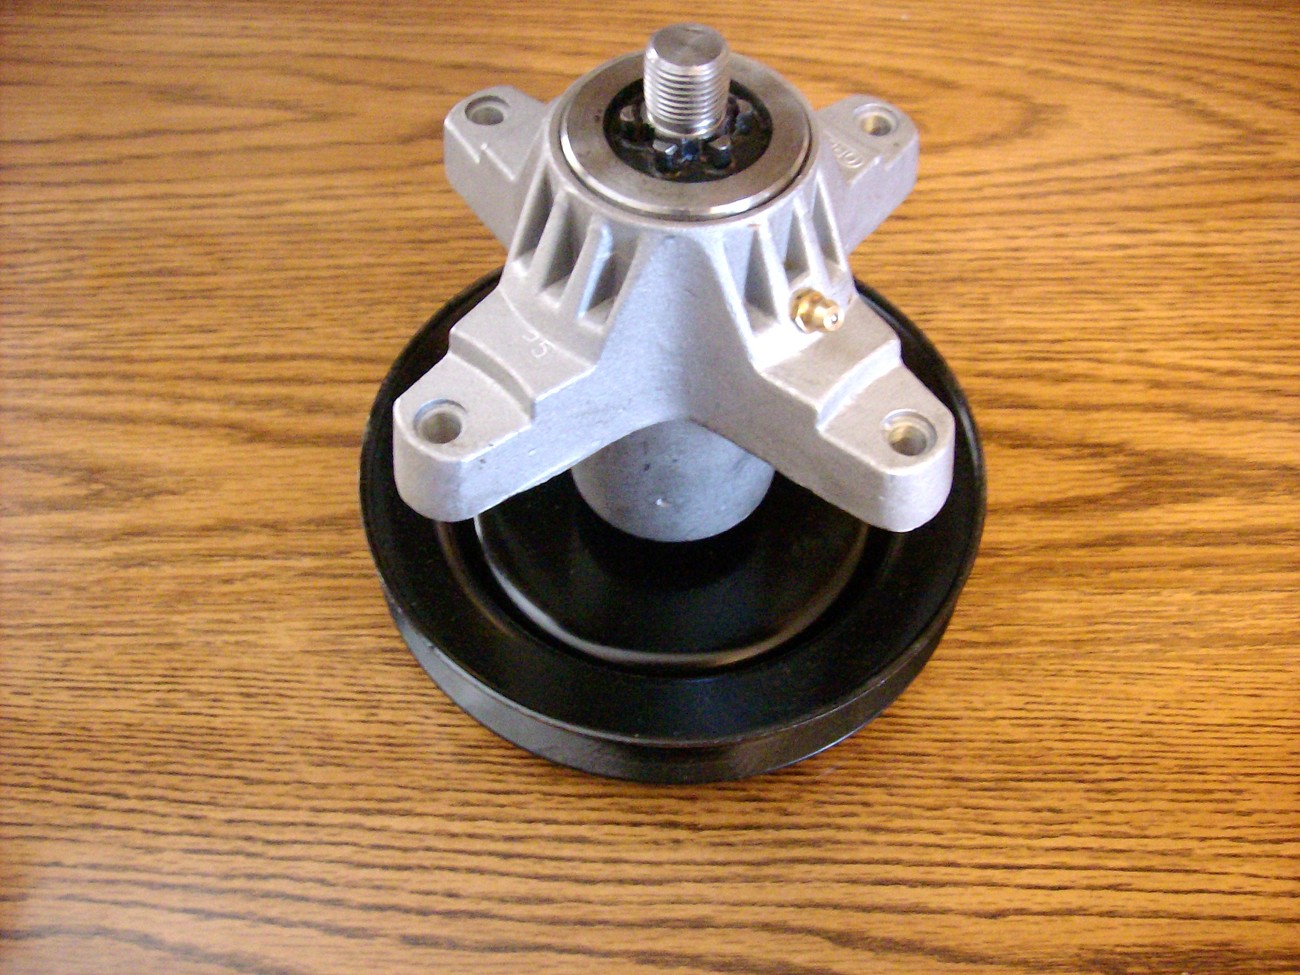 Cub Cadet, MTD, Toro 42" Cut Deck Spindle with Pulley 918-04456, 918-04461 - $84.62